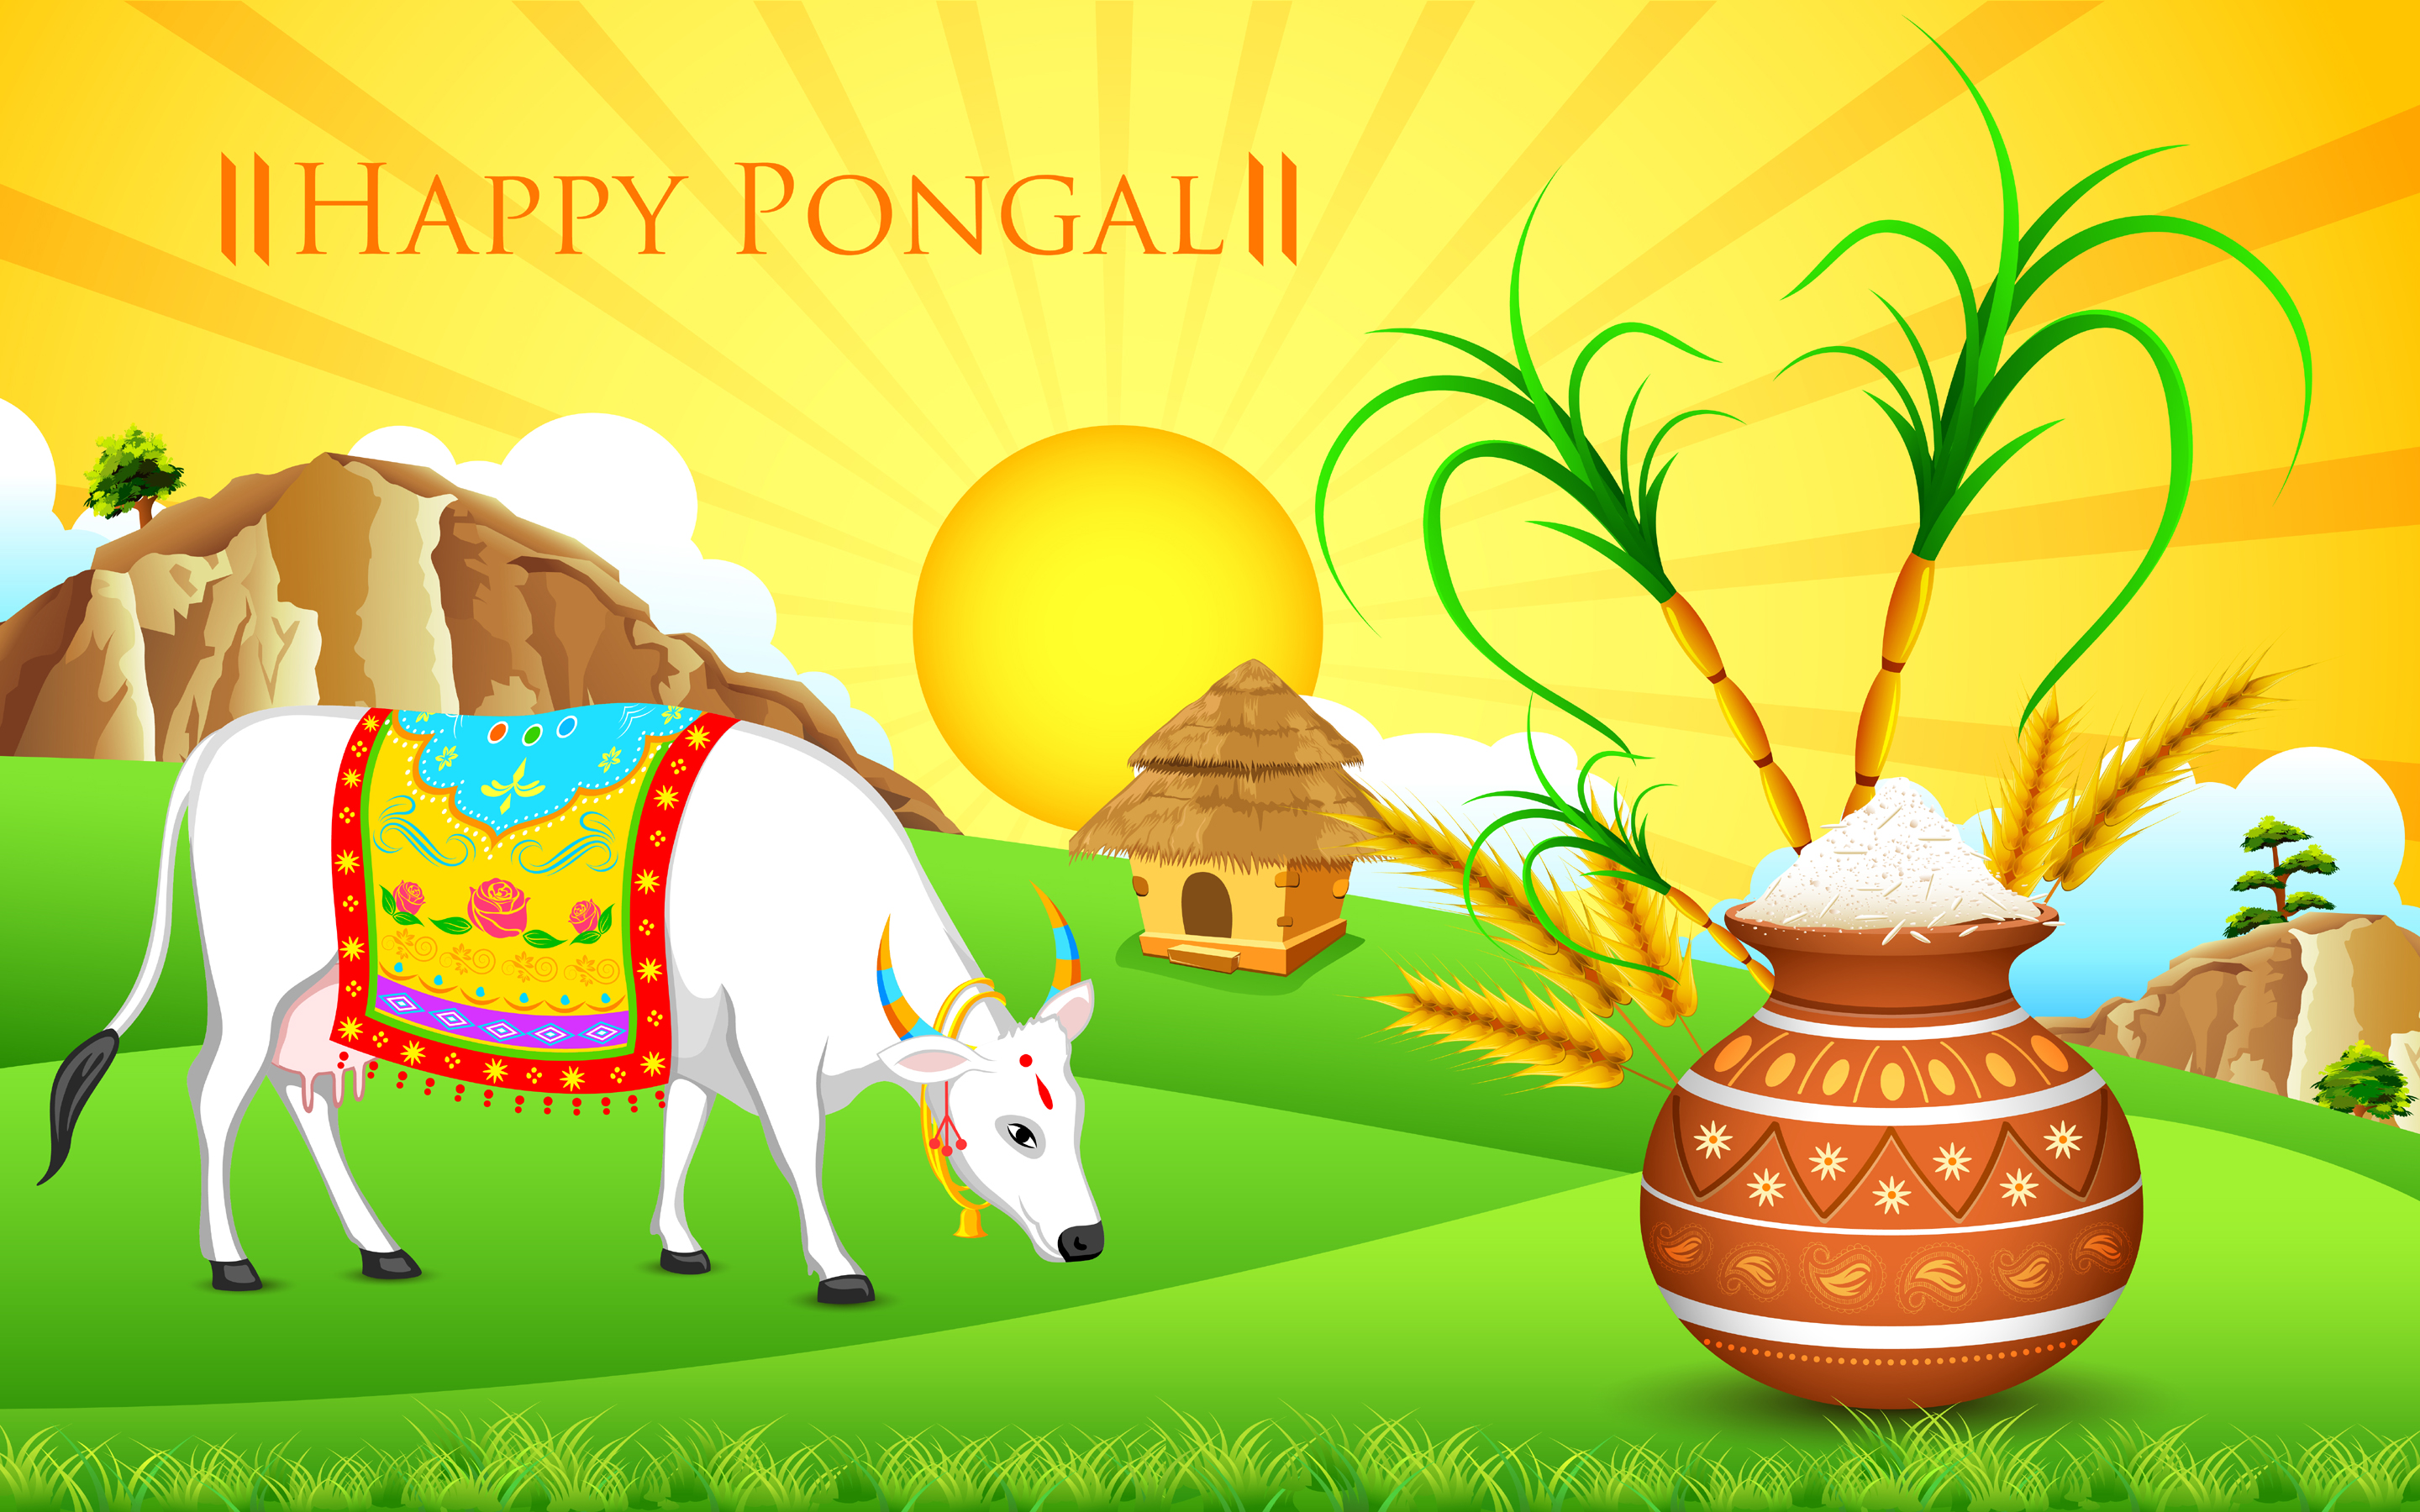 Happy Pongal 2017 Images Pictures, Sankranthi HD Wallpapers Download For  Desktop WhatsApp DP Facebook Wall